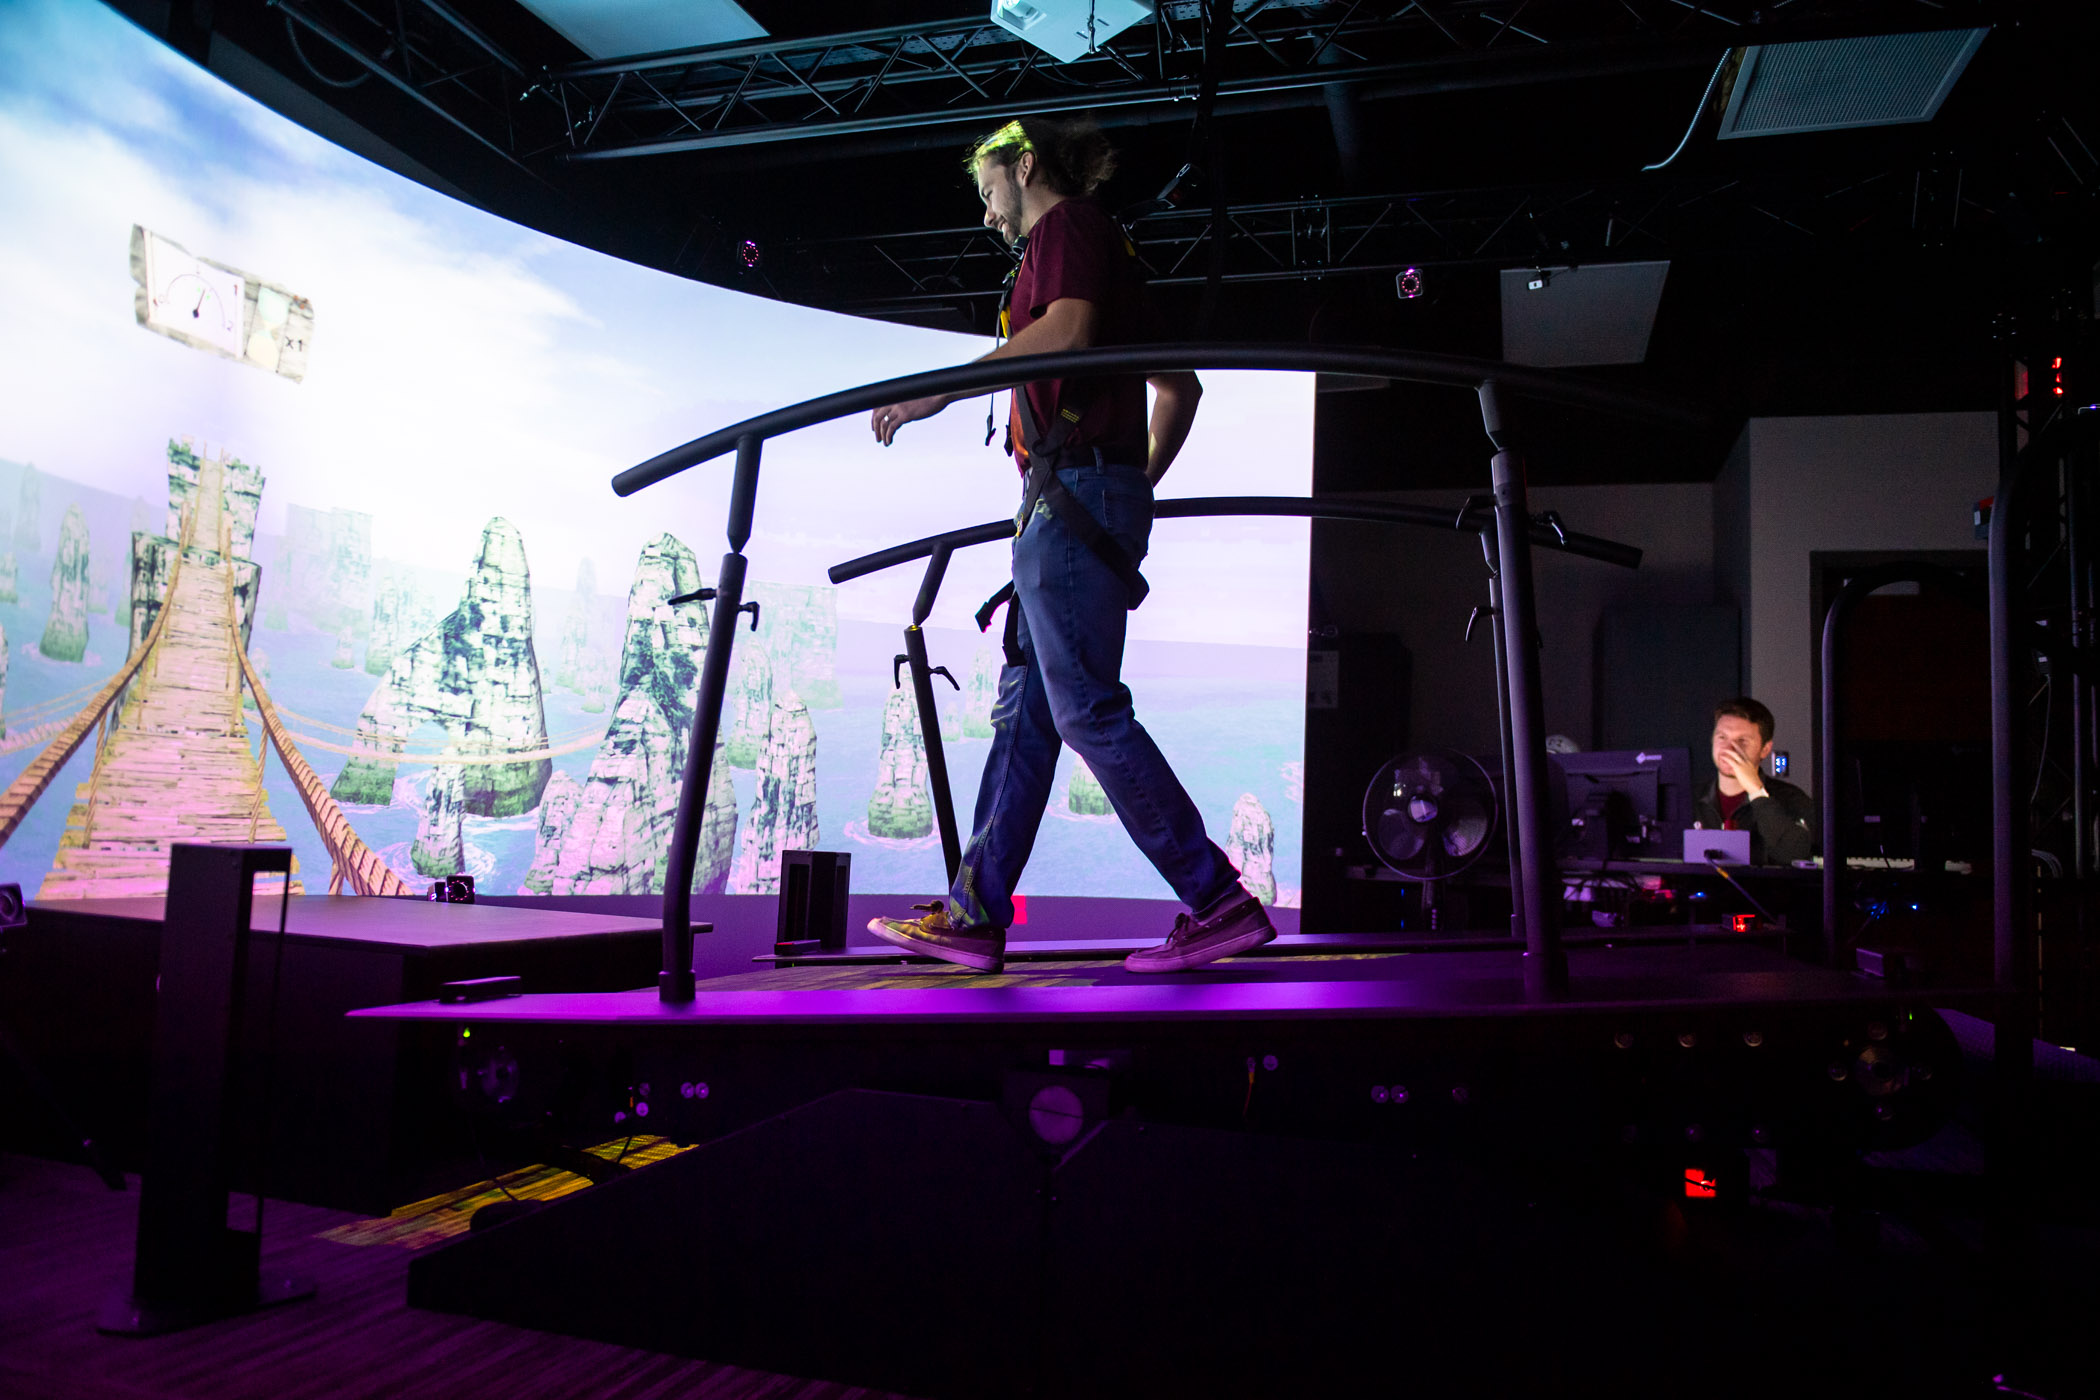 A man walks on a treadmill surrounded by an immersive screen